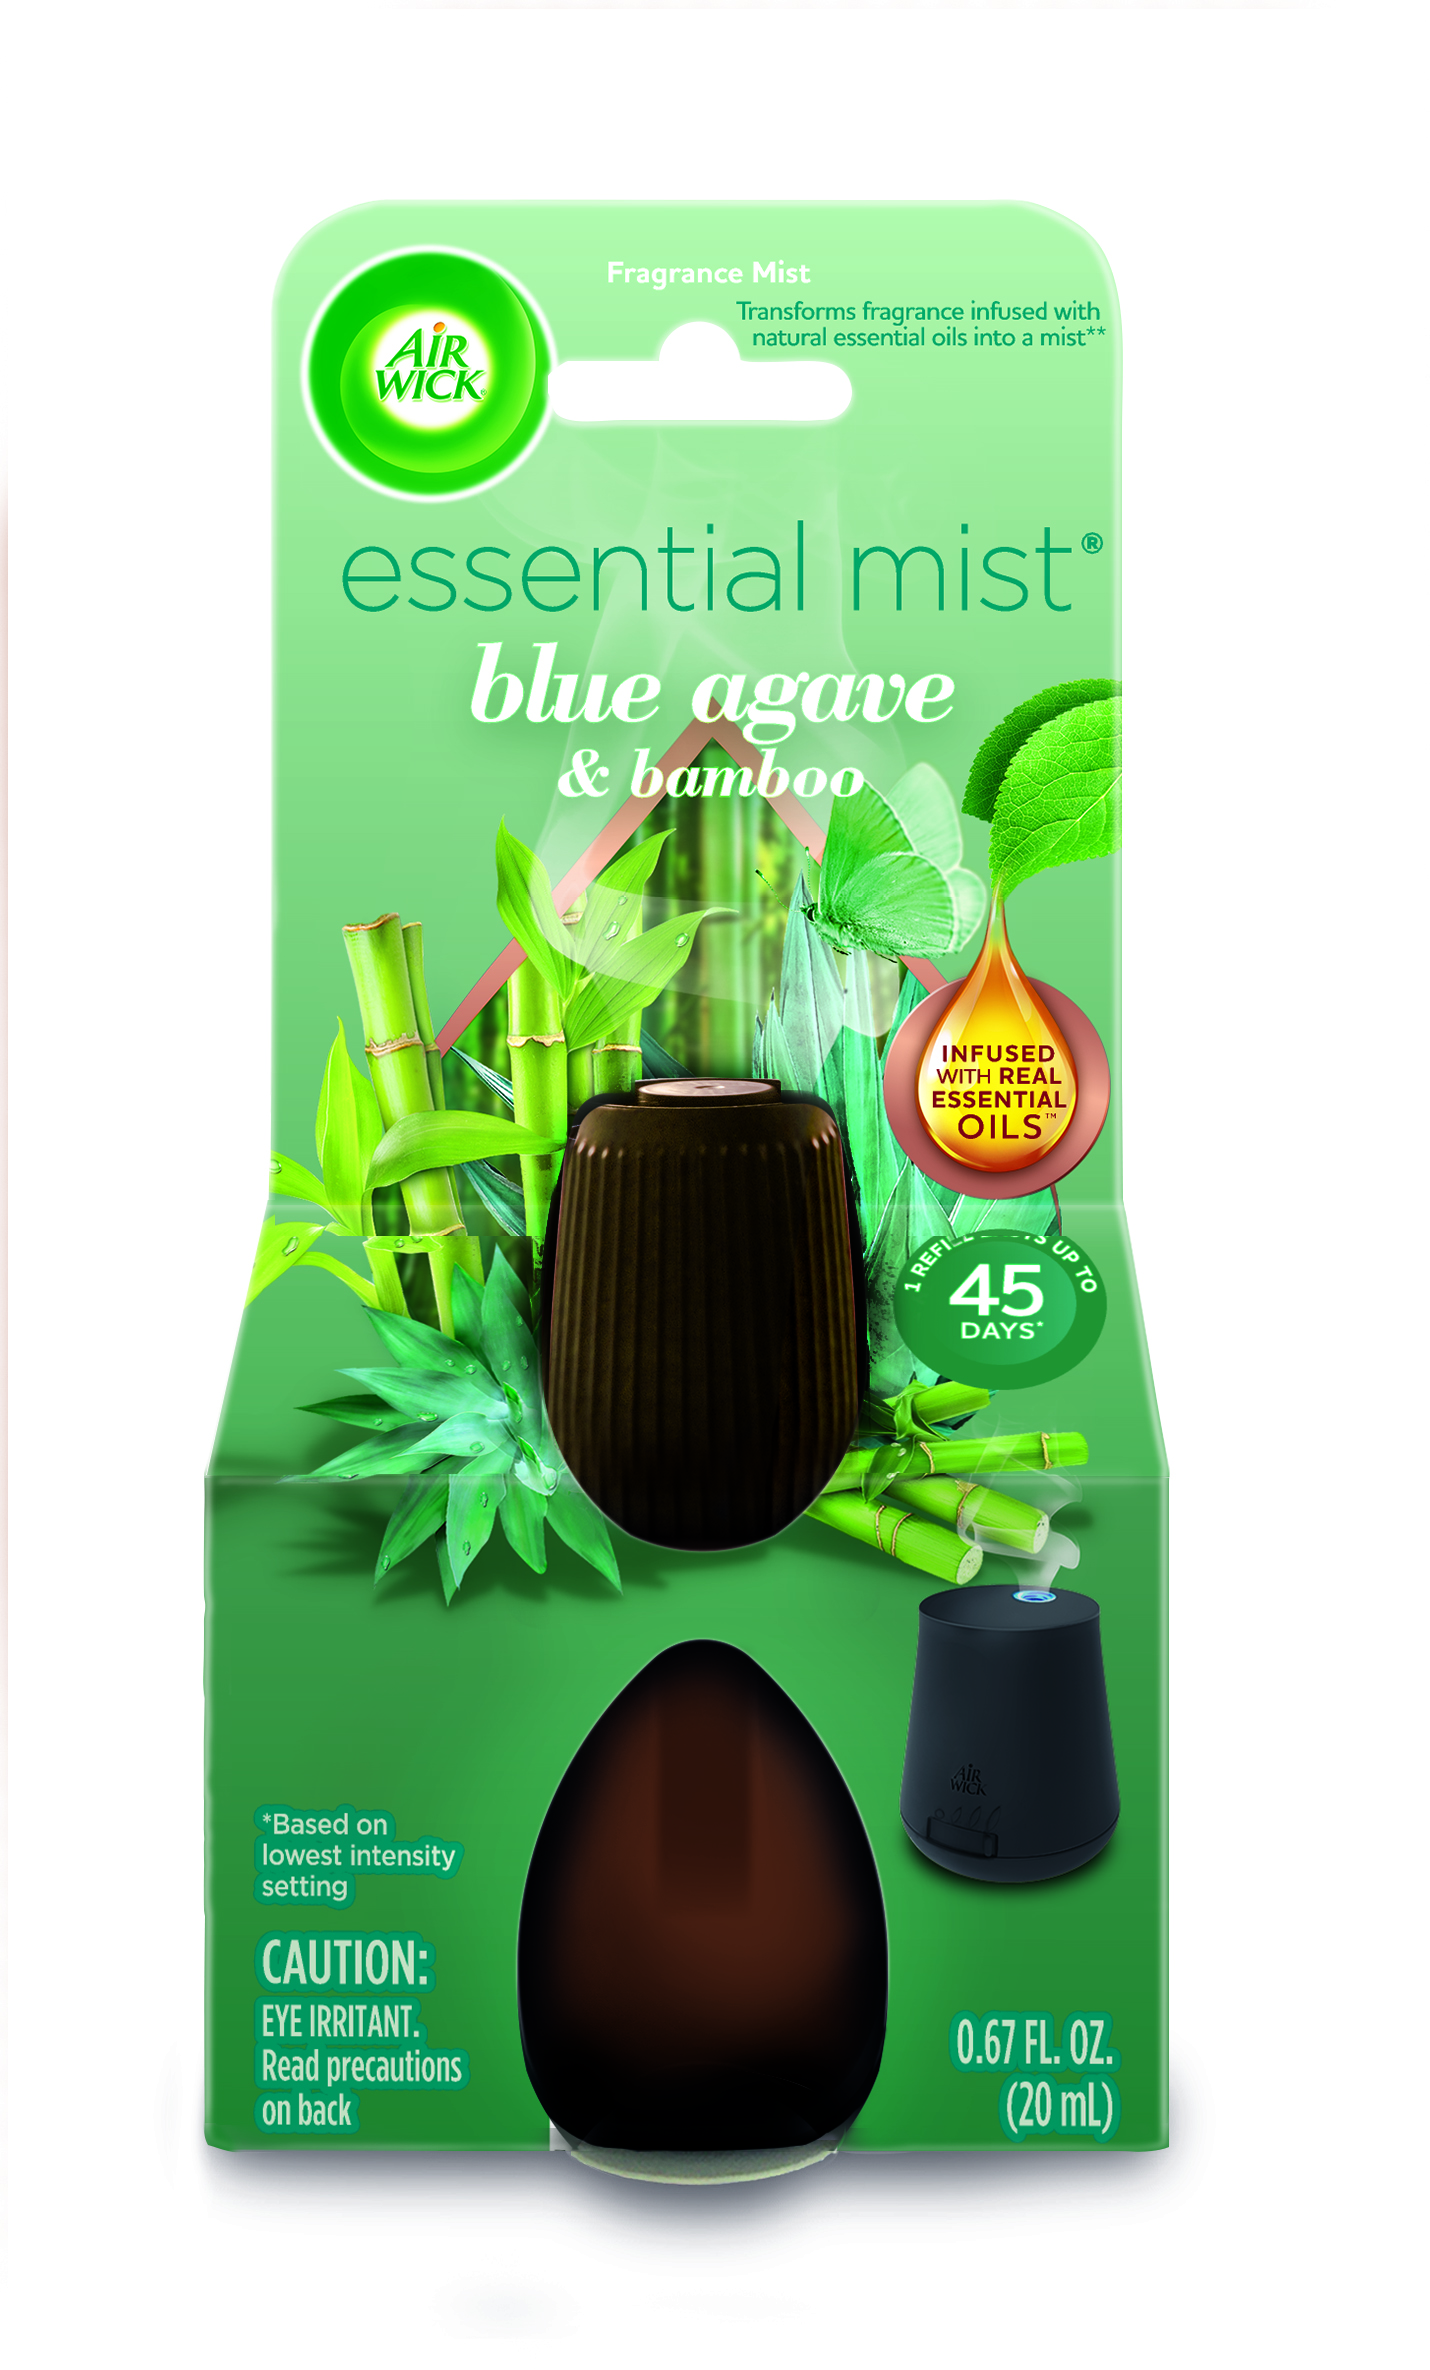 AIR WICK® Essential Mist - Blue Agave & Bamboo